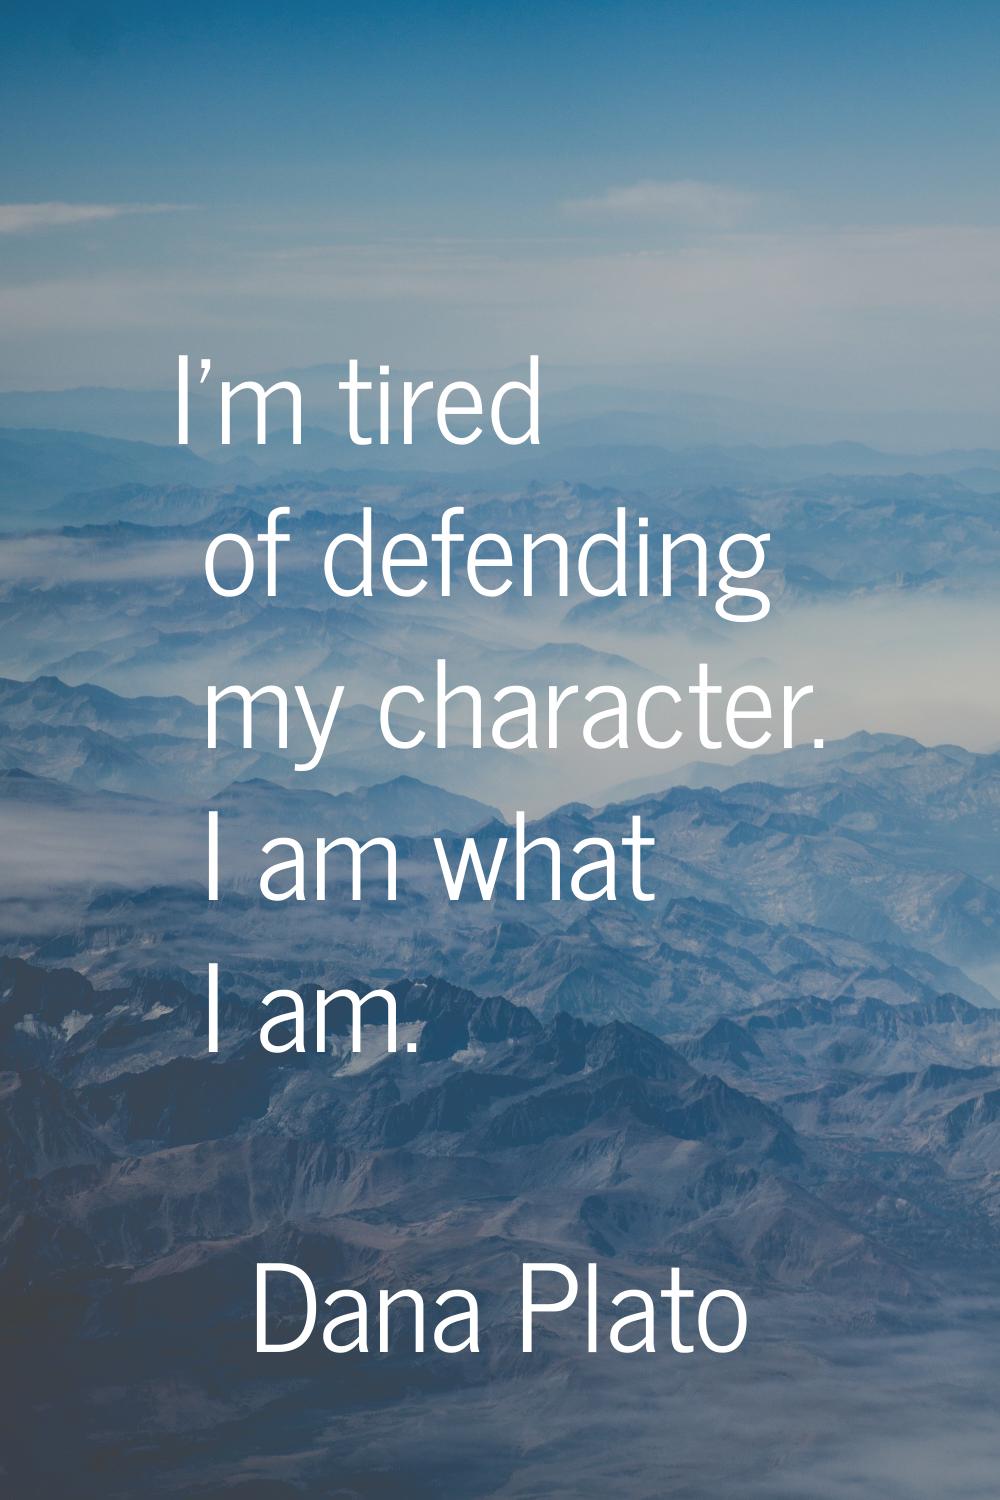 I'm tired of defending my character. I am what I am.